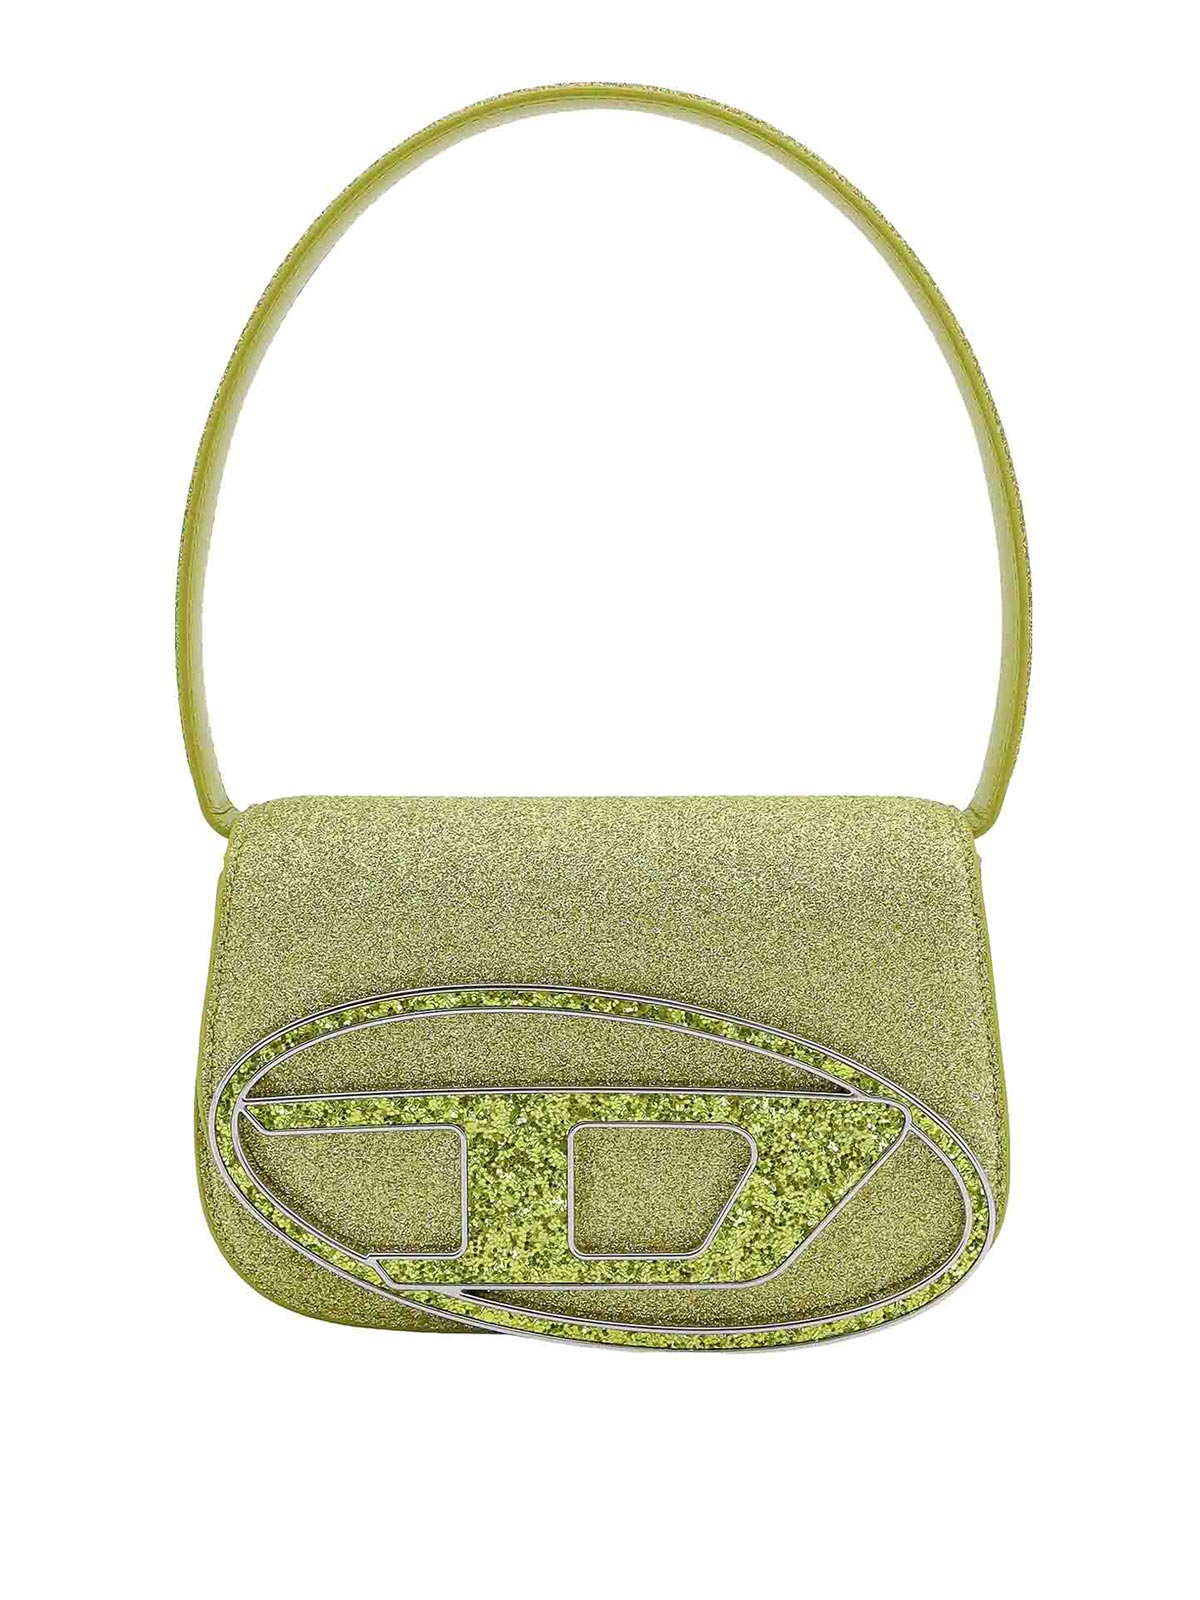 Diesel Leather Shoulder Bag With All-over Glitter In Green